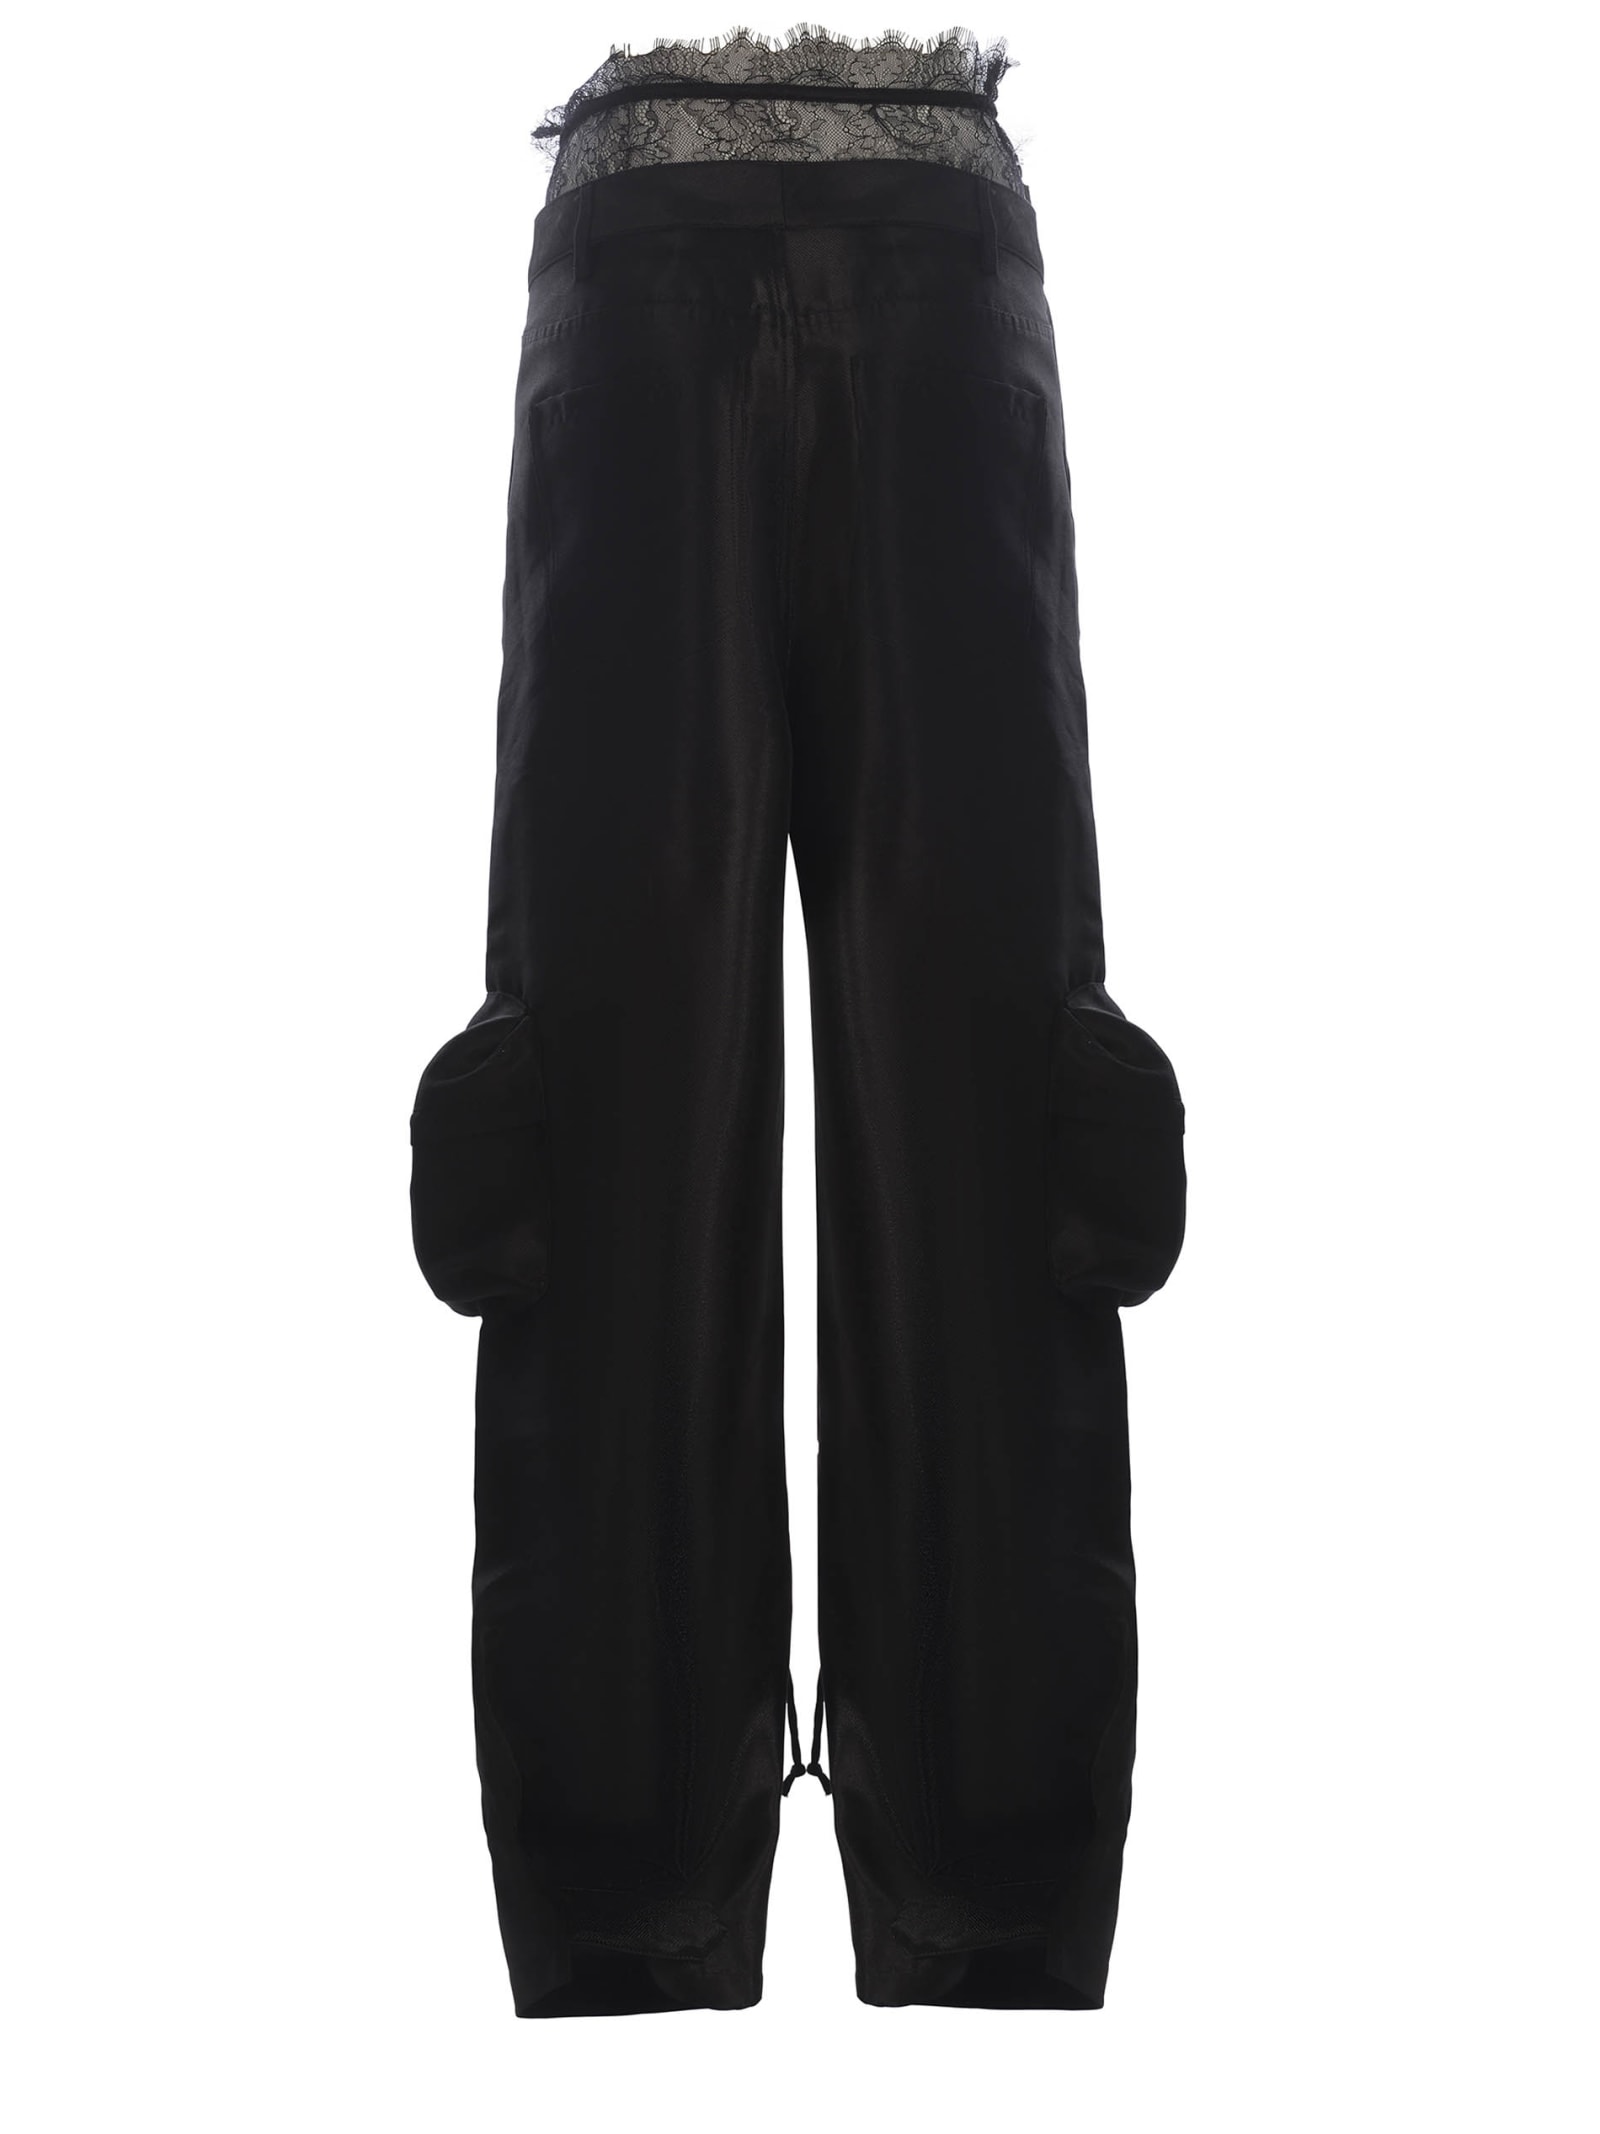 Shop Rotate Birger Christensen Trousers Rotate Made Of Viscosa Blend In Nero